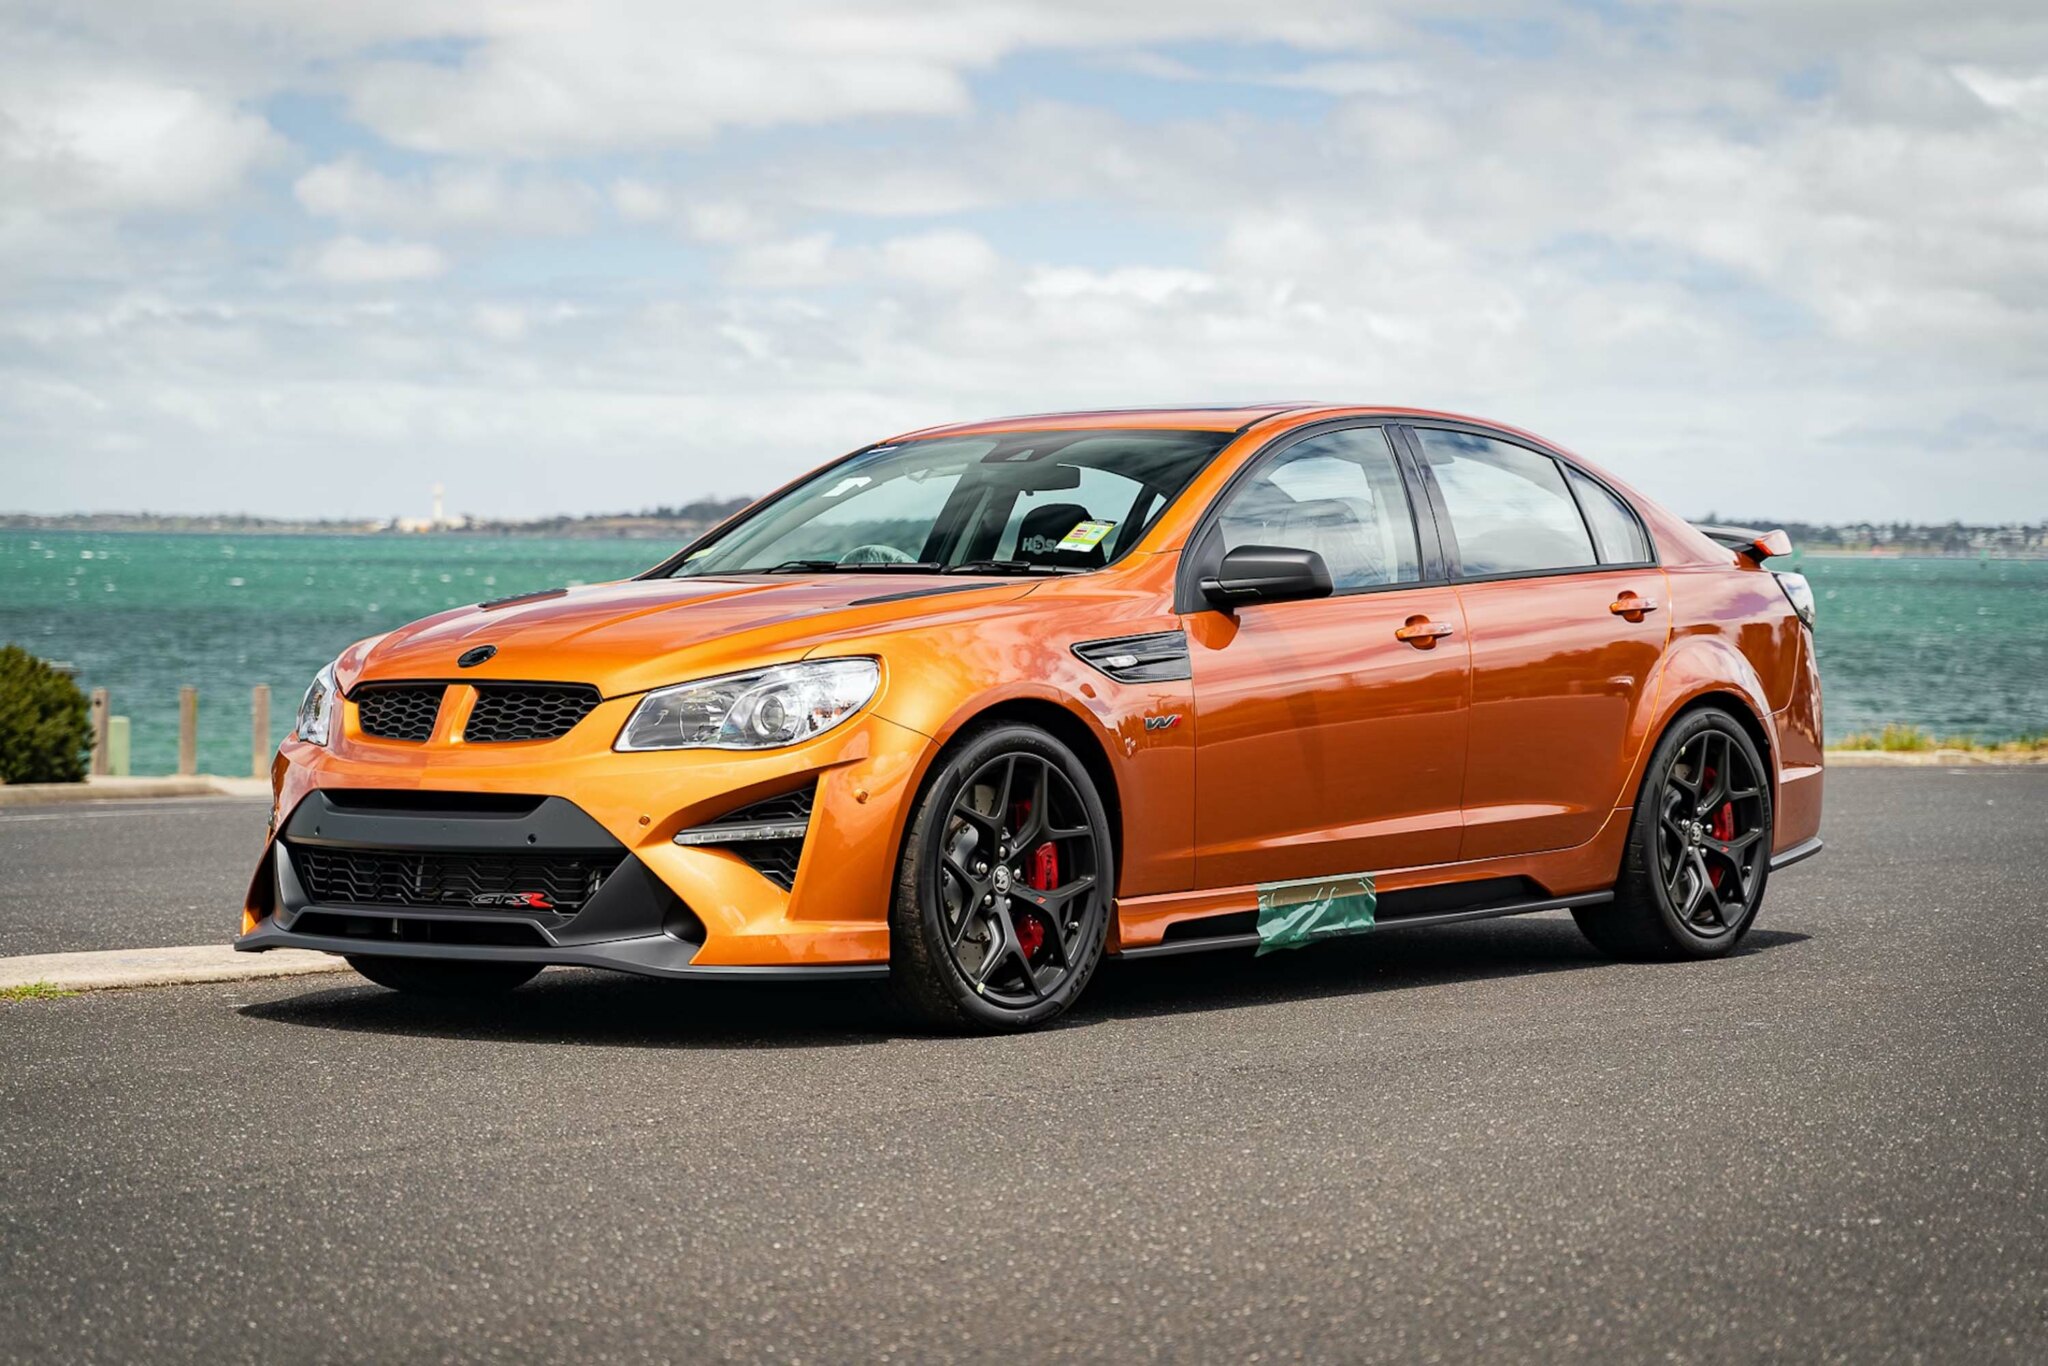 HSV GTSR W1 with 32km reaches $350K at auction